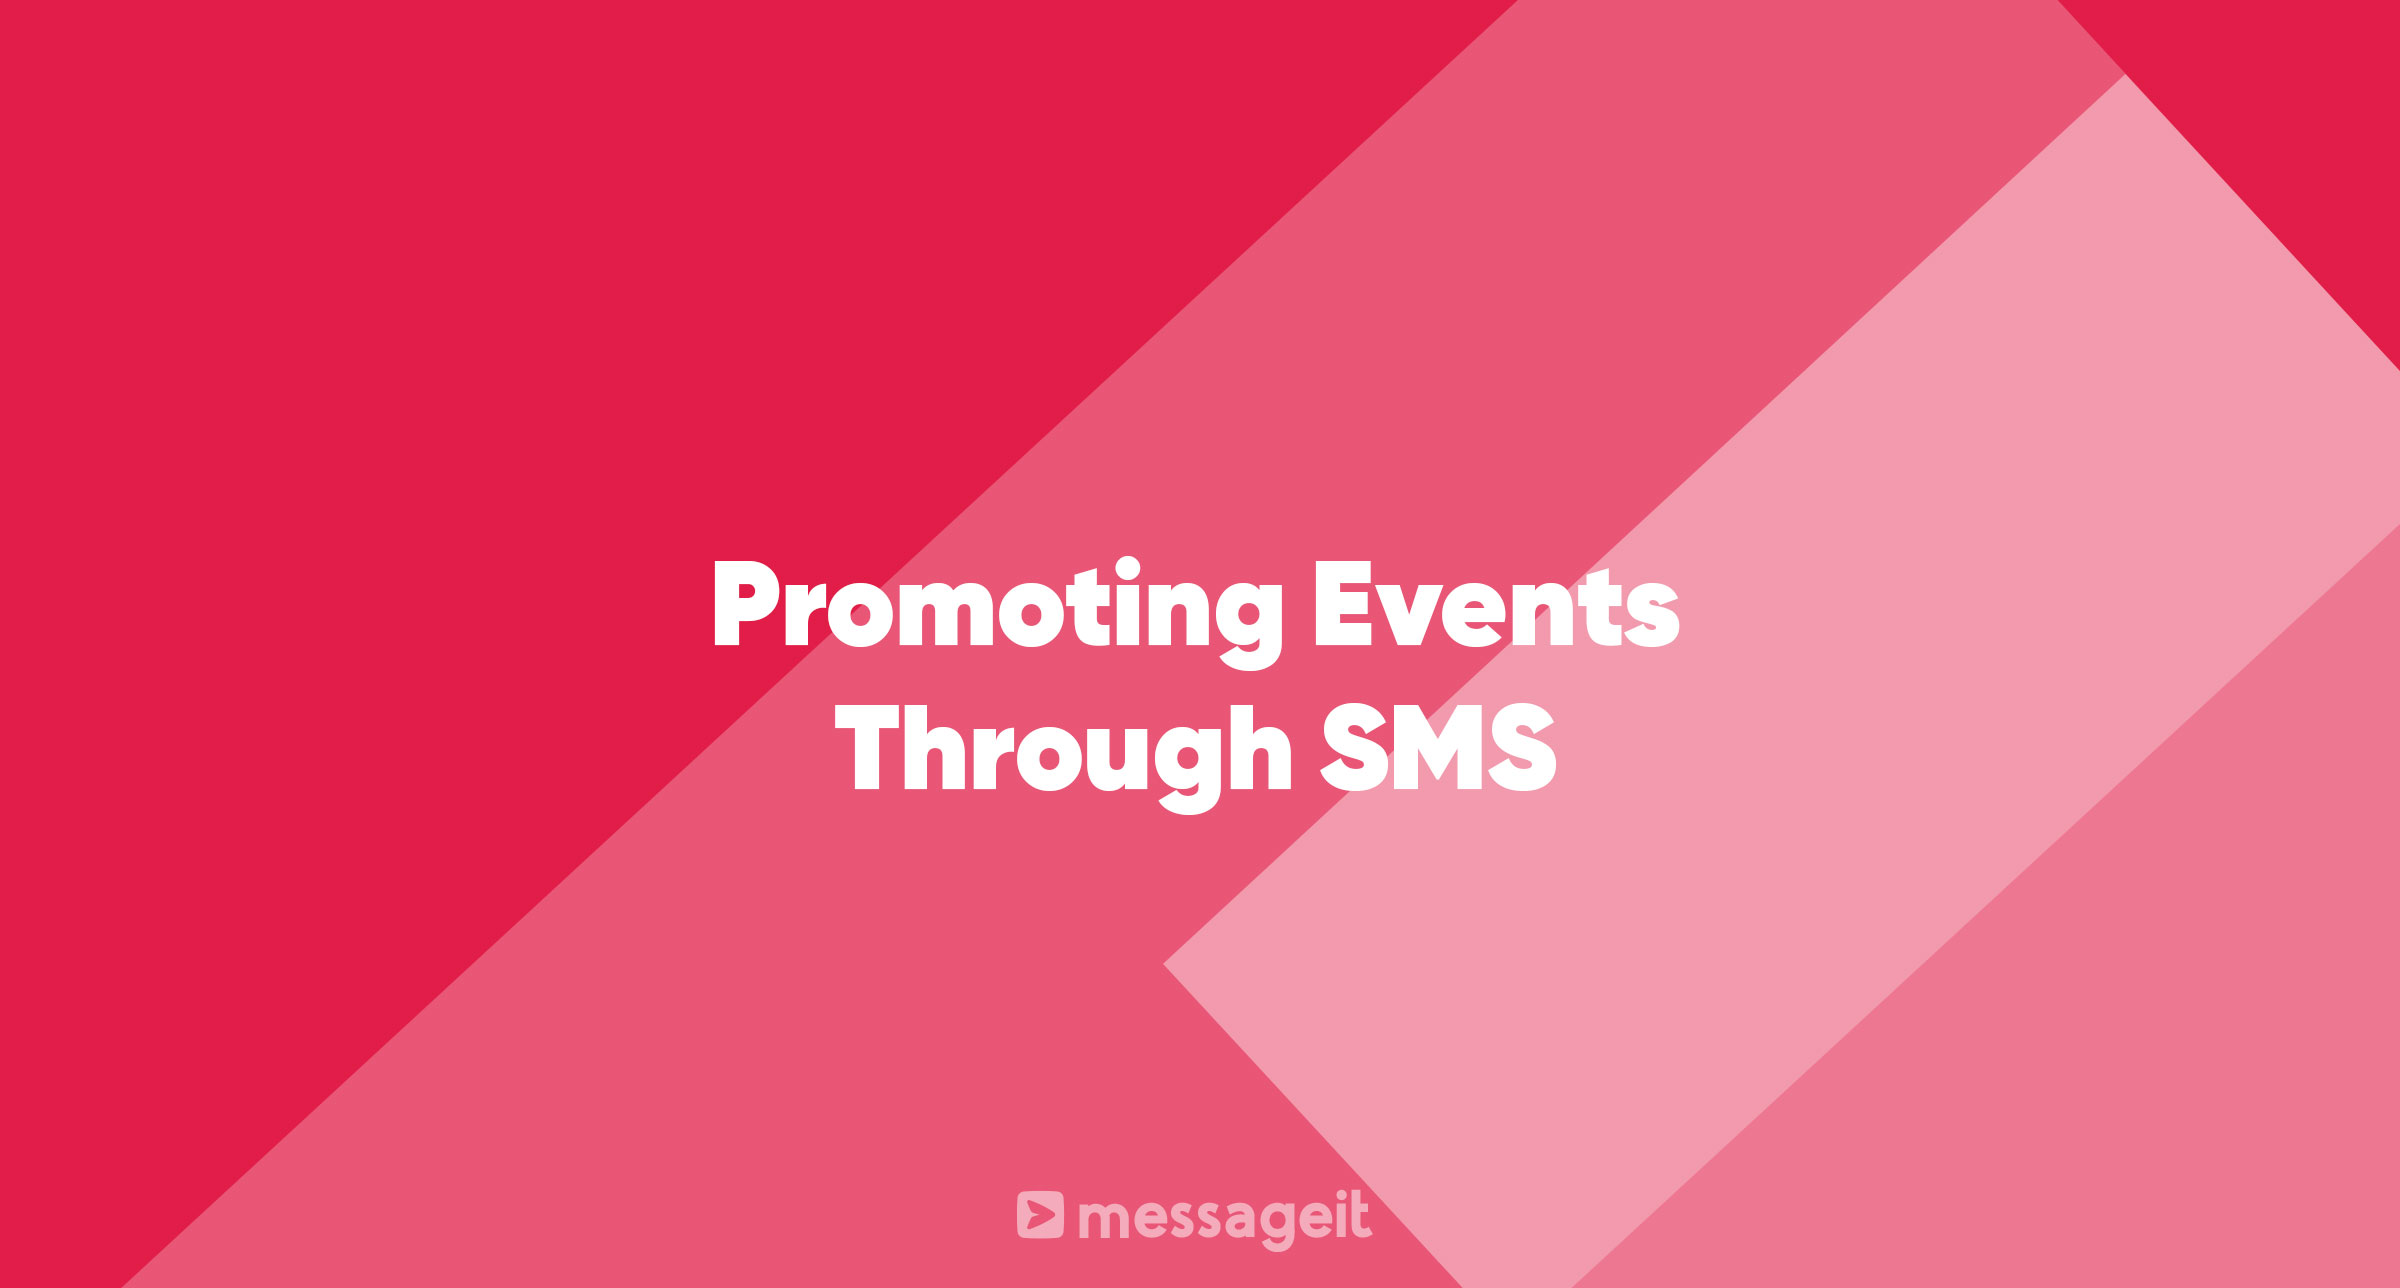 Article | Promoting Events Through SMS